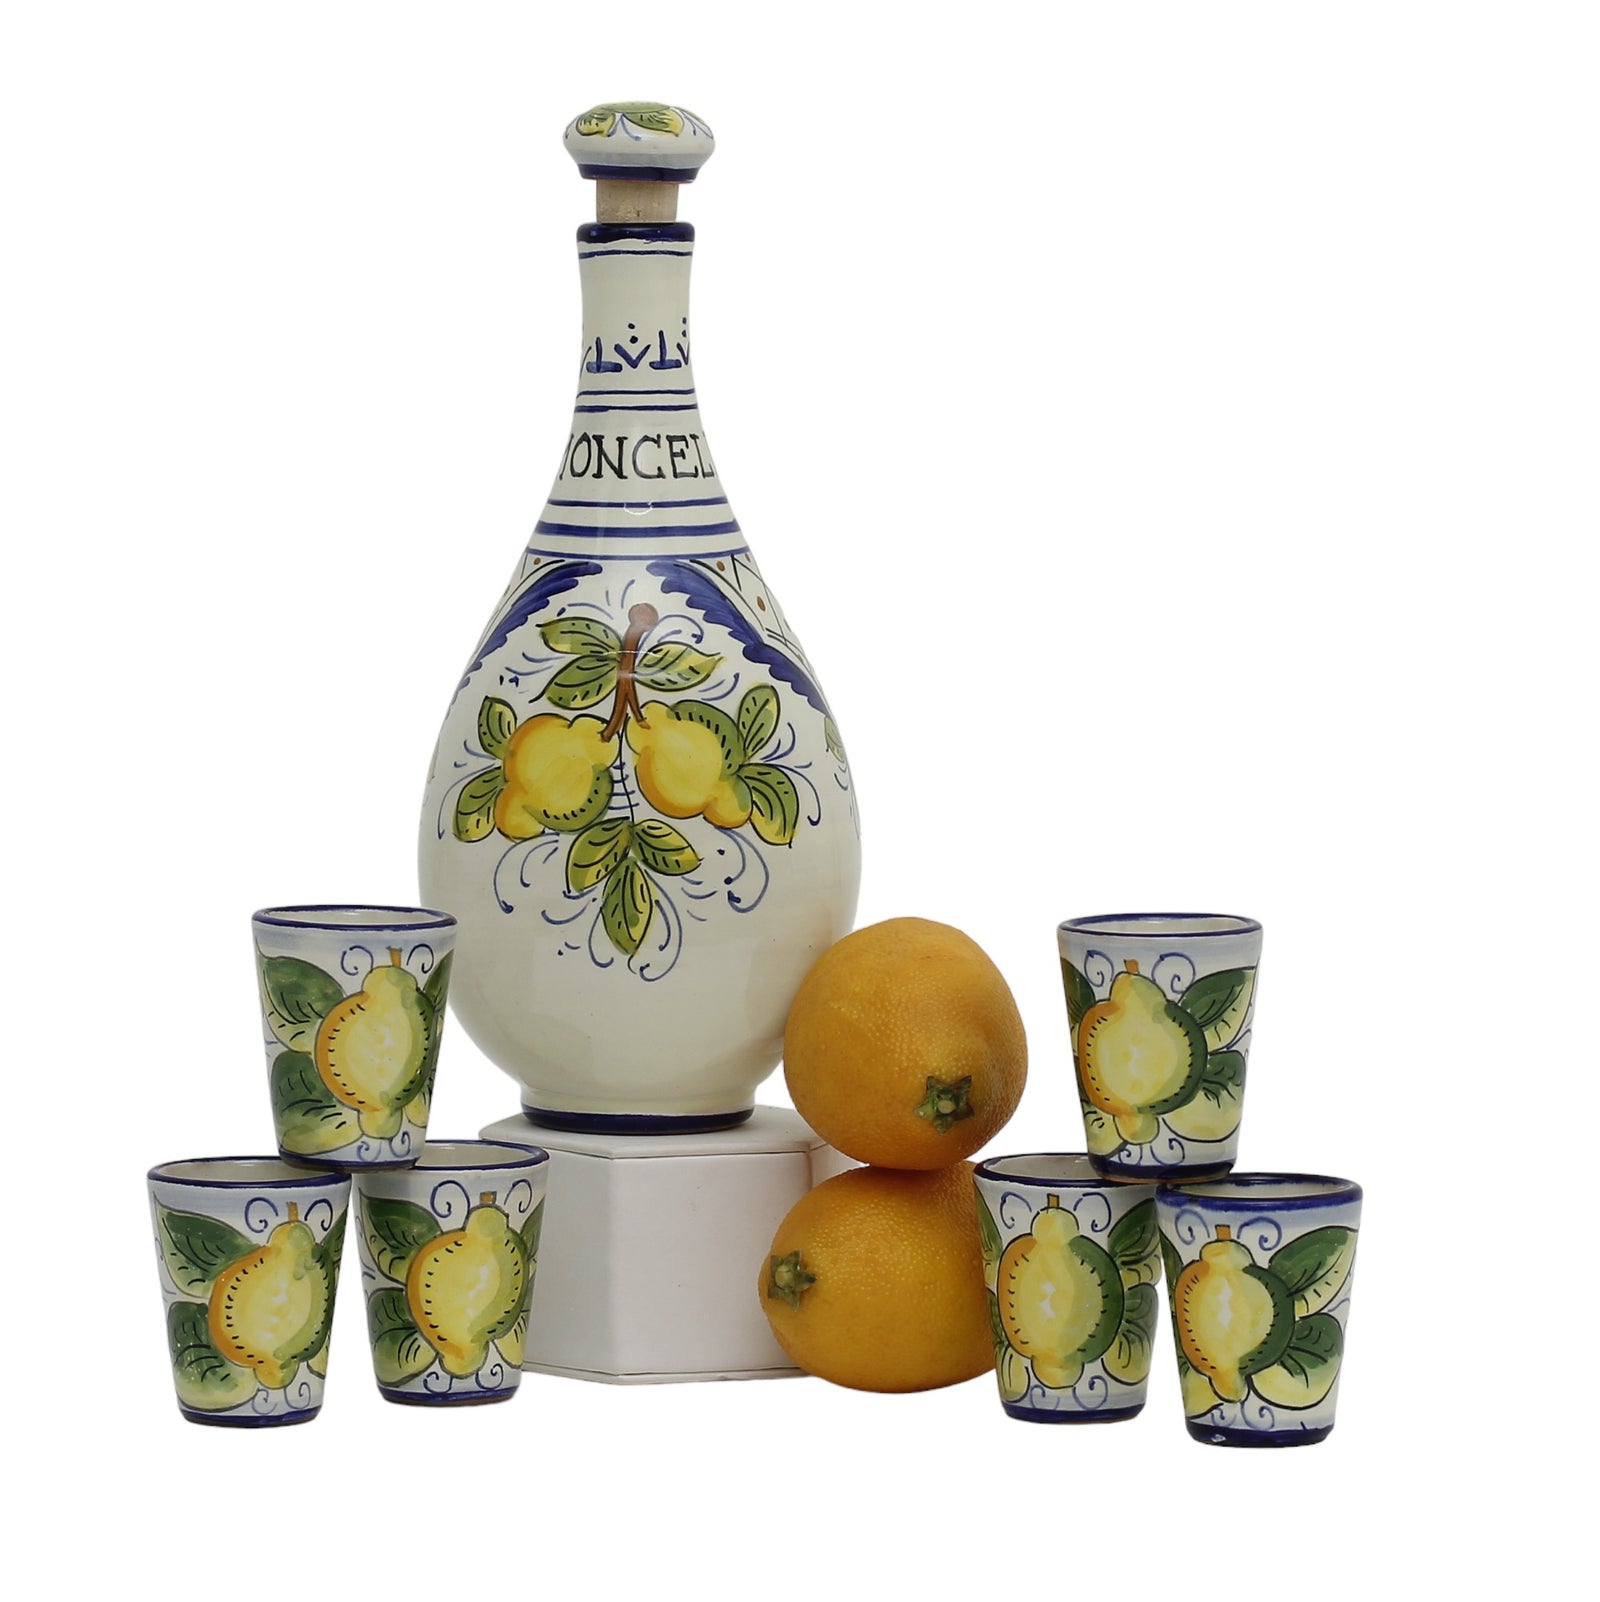 LIMONCELLO: Limoncello Set with Blue trimmings - Bottle with stopper and 6 Shot Glasses (Limocello liquor not included)